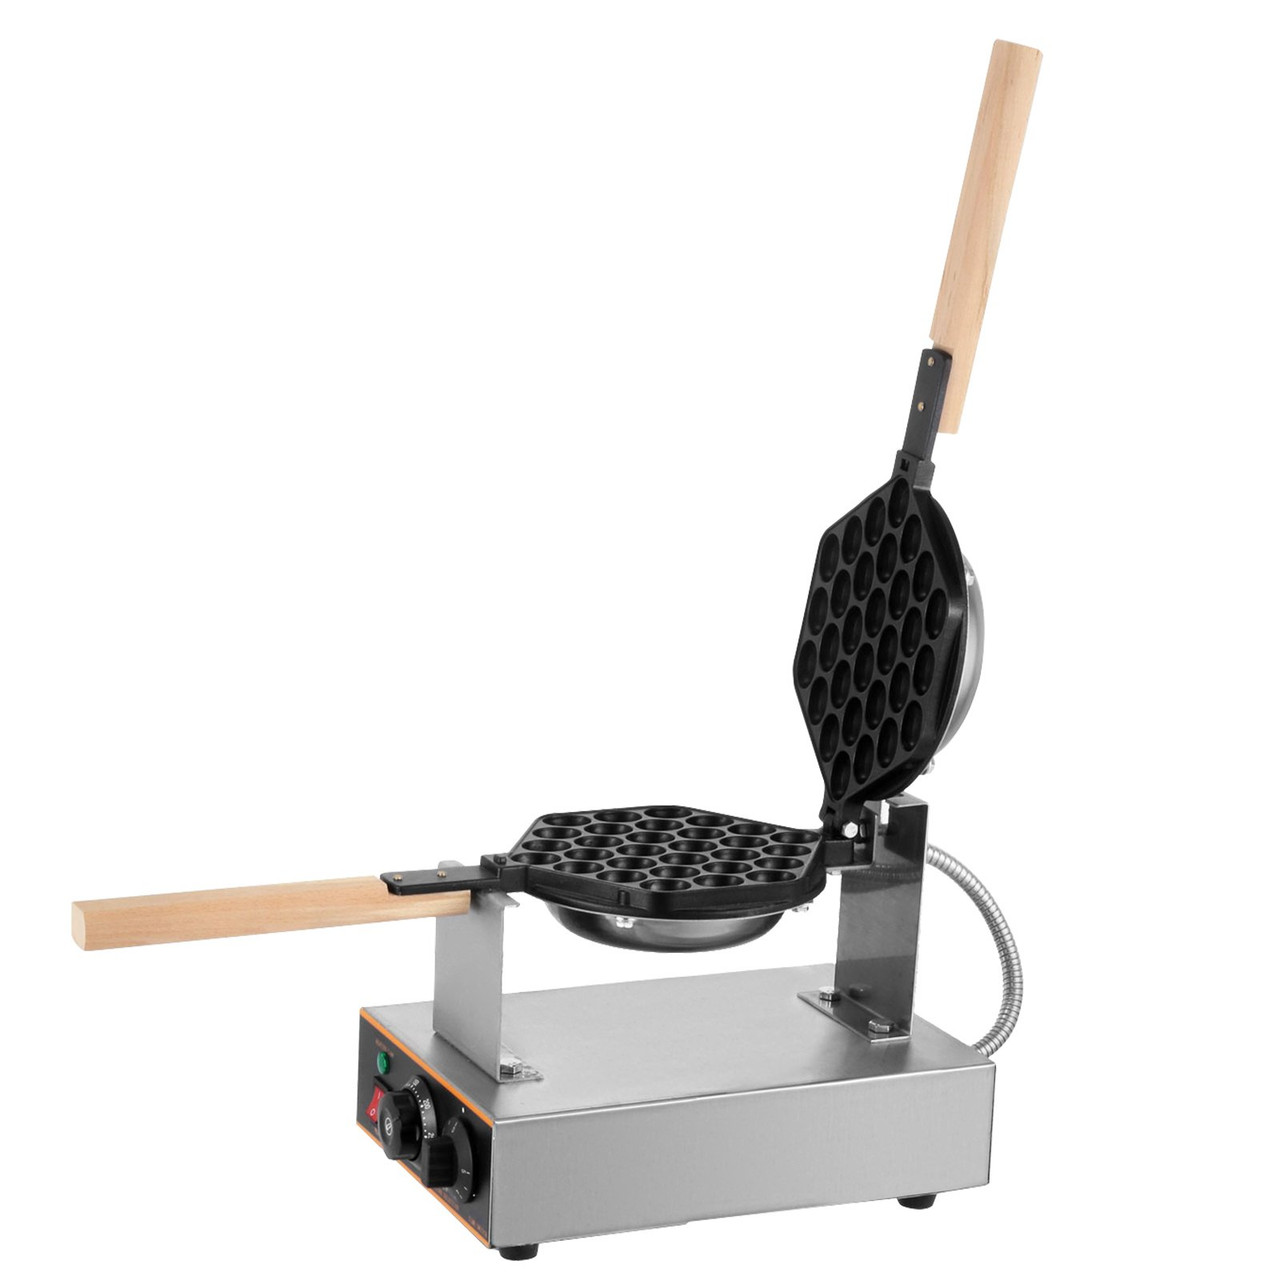 VEVOR Commercial Bubble Waffle Maker, 1400W Egg Bubble Puff Iron w/ 180° Rotatable 2 Pans & Wooden Handles, Stainless Steel Baker w/ Non-Stick Teflon Coating, 50-250?/122-482? Adjustable